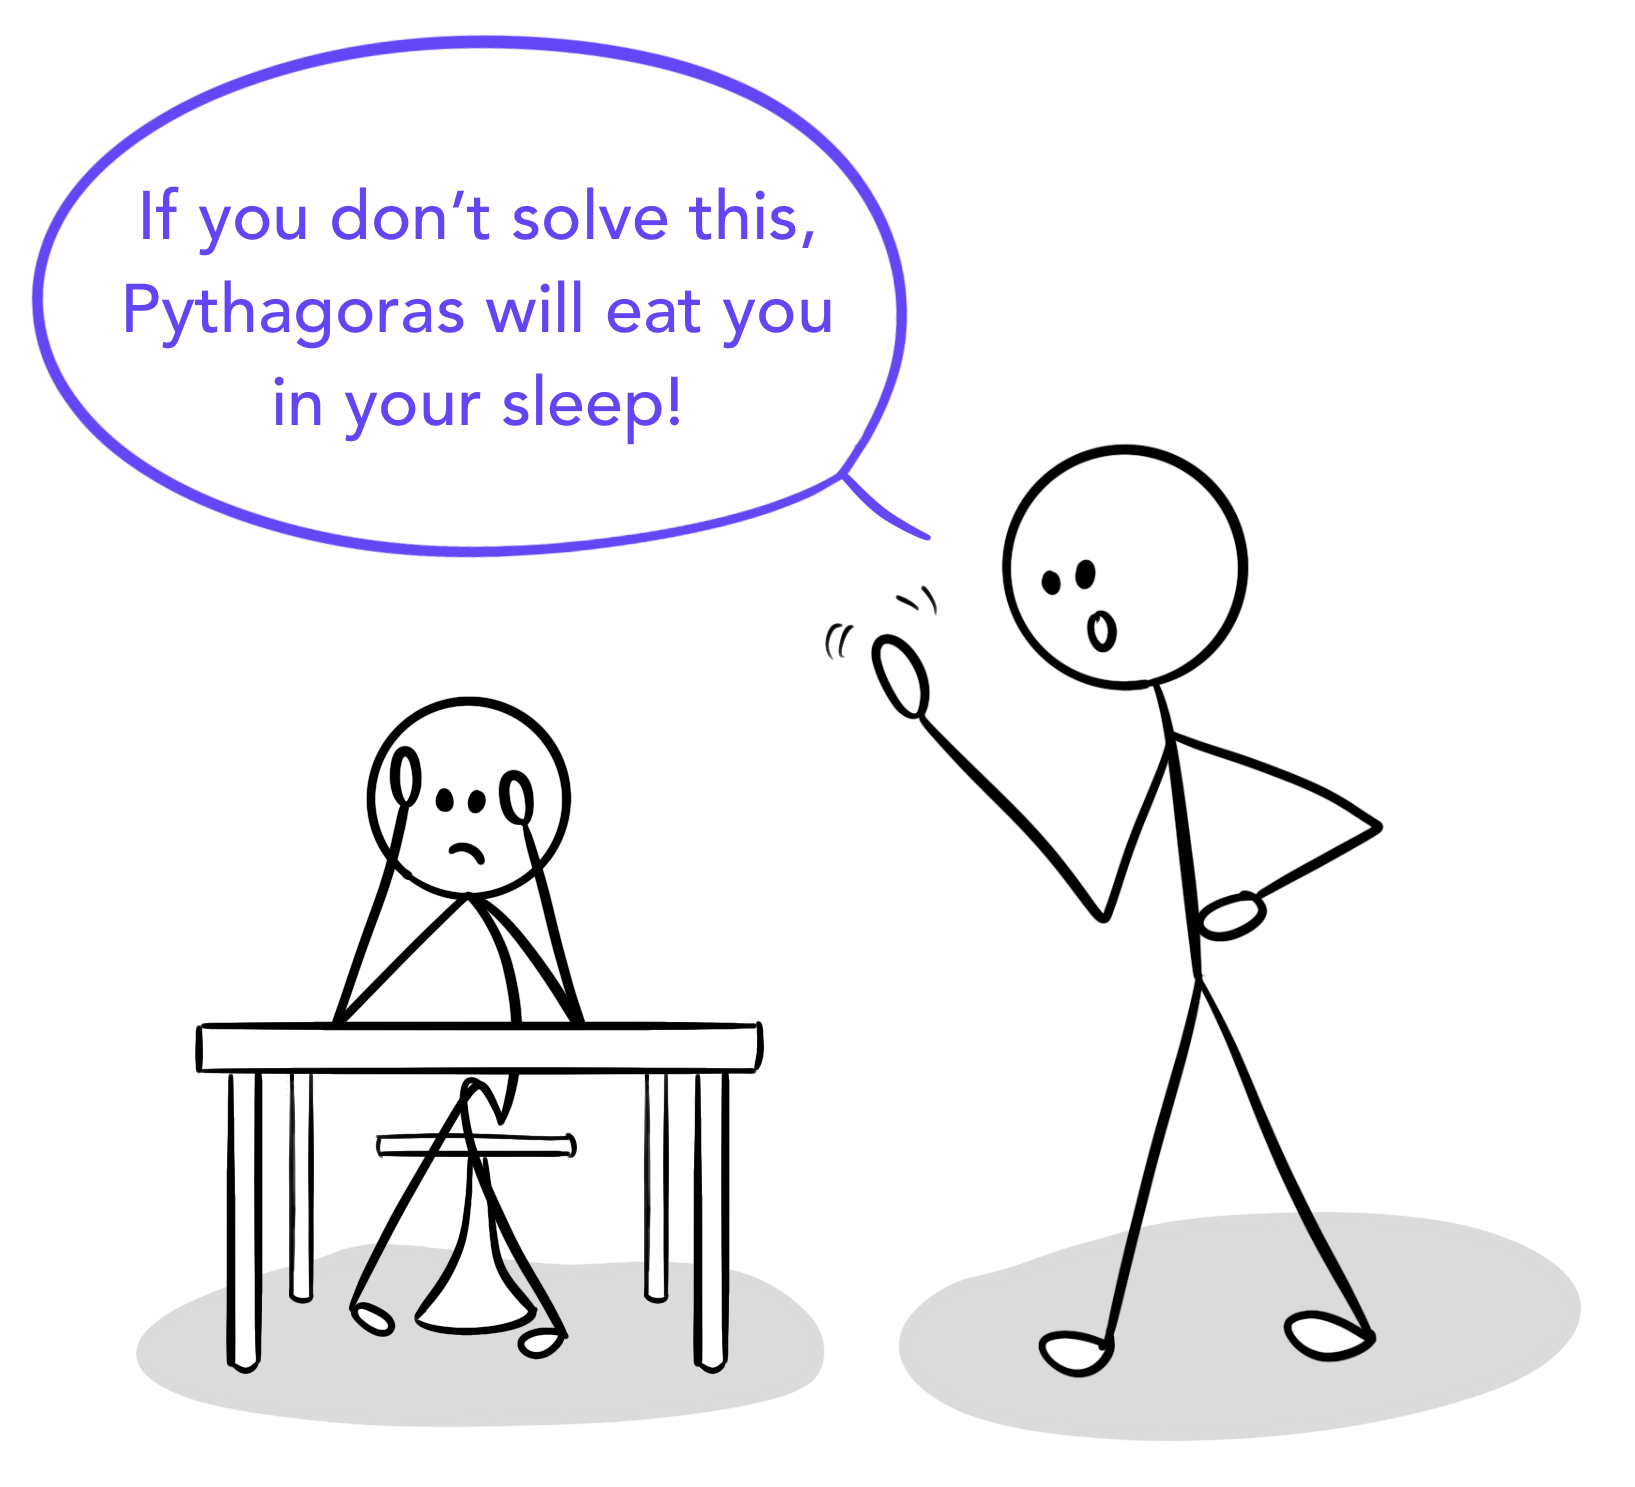 A teacher telling a student who is anxious about math that Pythagoras will eat them in their sleep if they don't manage to solve the problem.